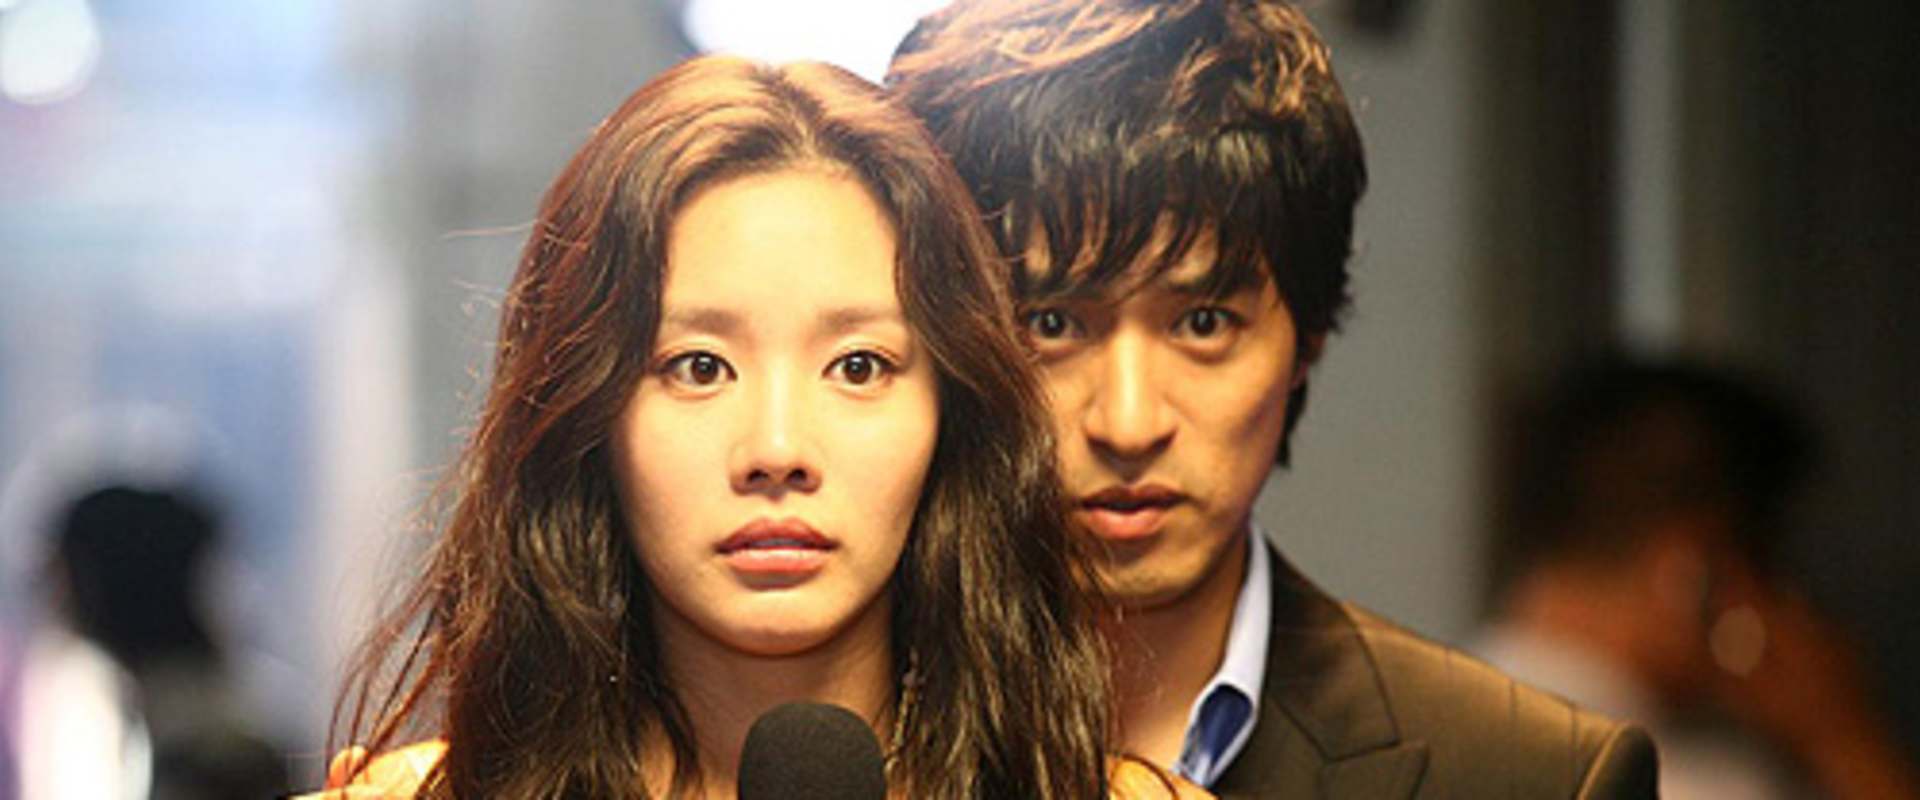 Watch 200 Pounds Beauty Full Movie On Fmovies To